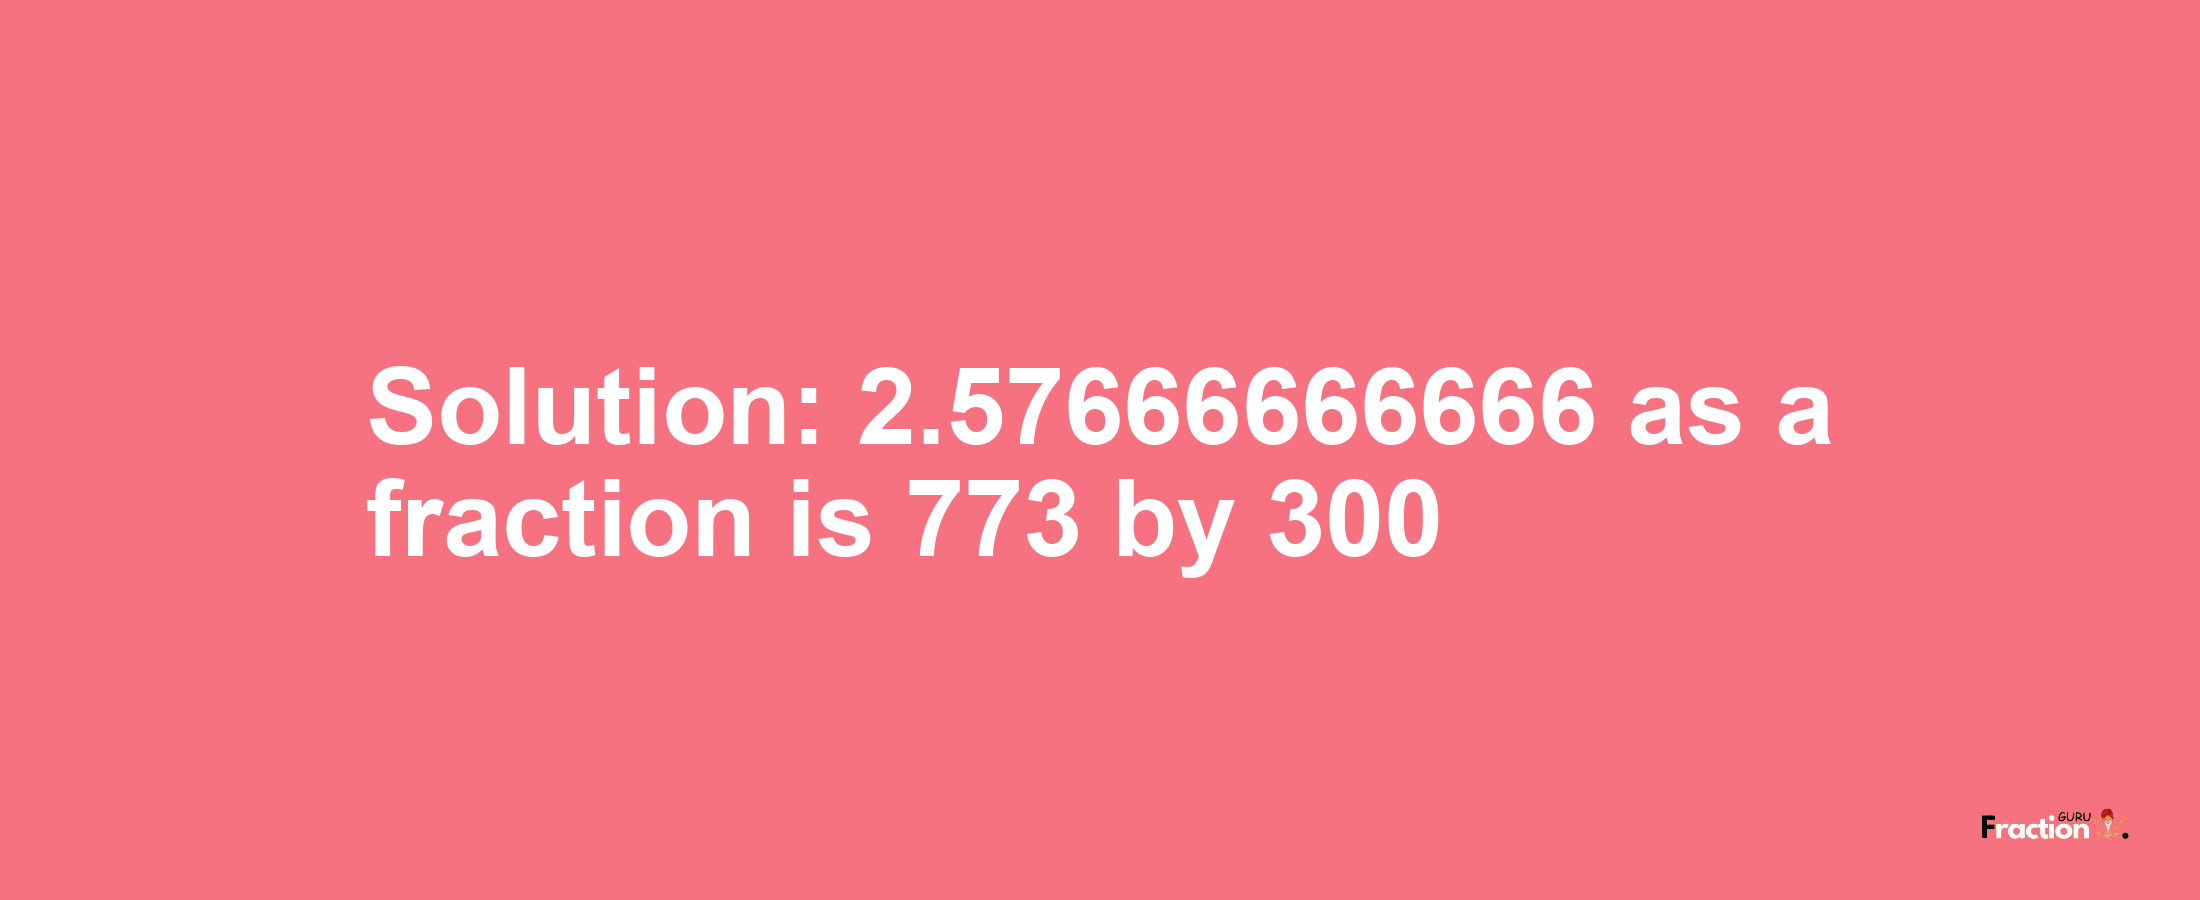 Solution:2.57666666666 as a fraction is 773/300